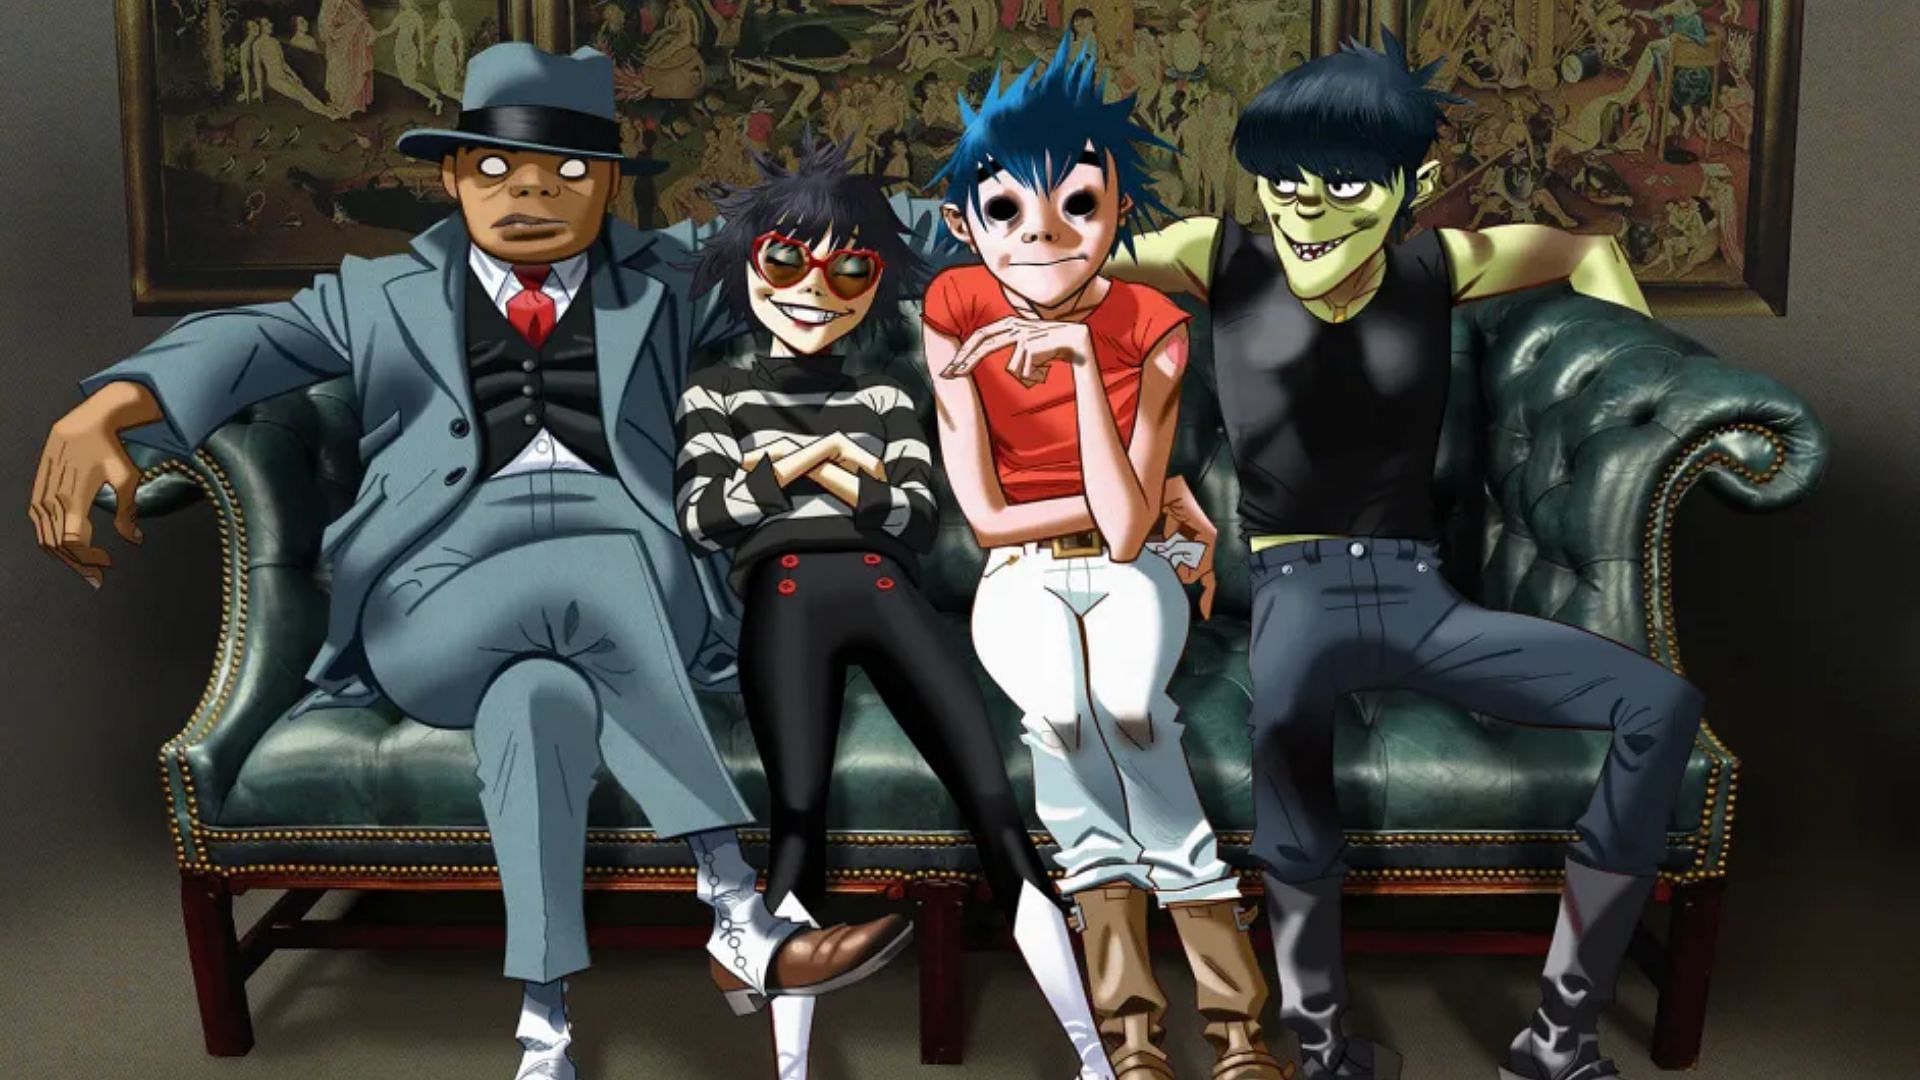 The Fortnite community would love to see Gorillaz join the game